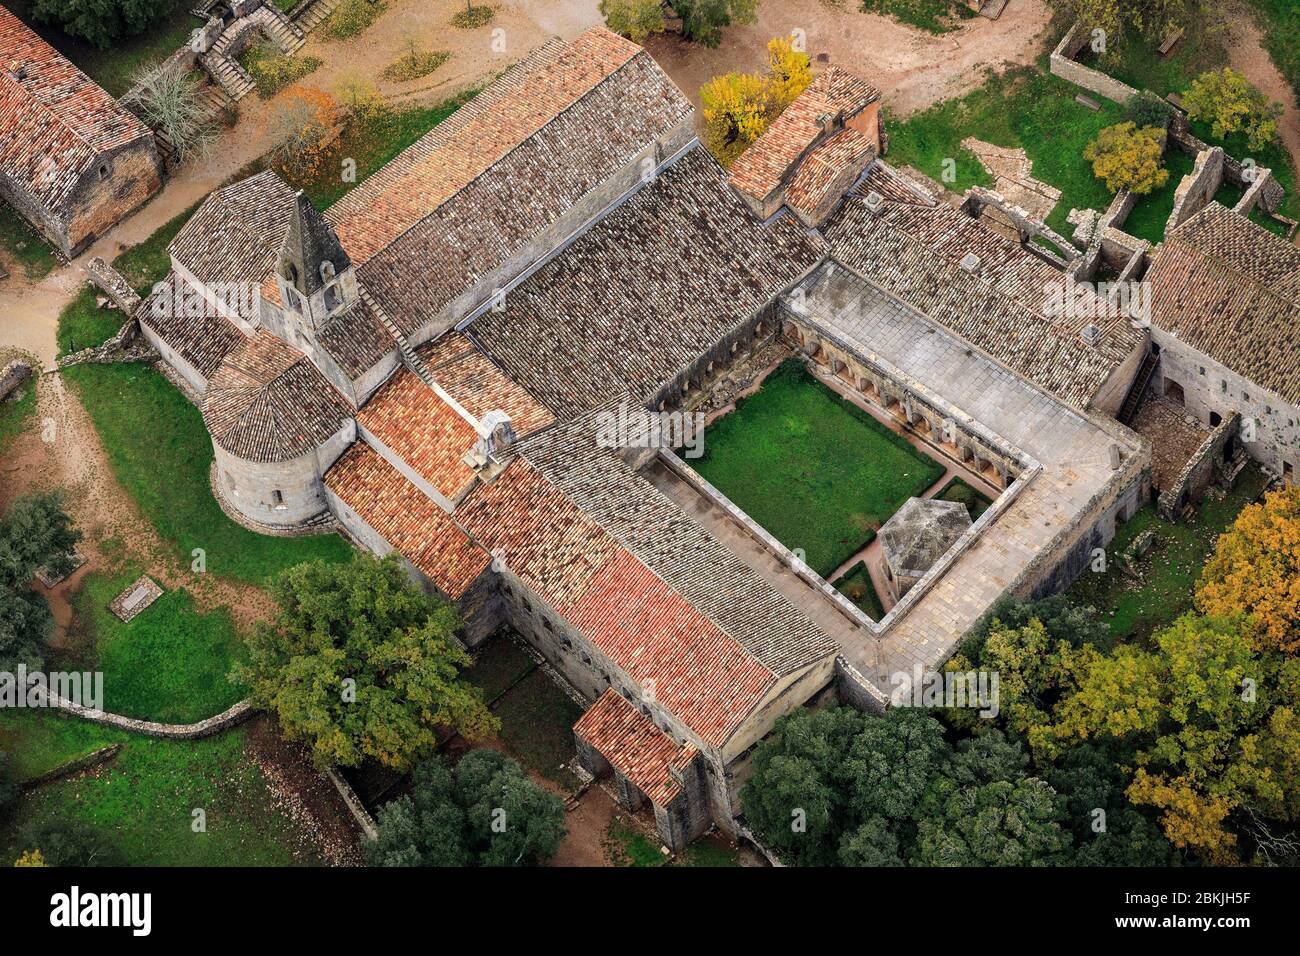 France, Var, Le Thoronet, Thoronet Abbey (12th century), listed Historic Monument (aerial view) Stock Photo